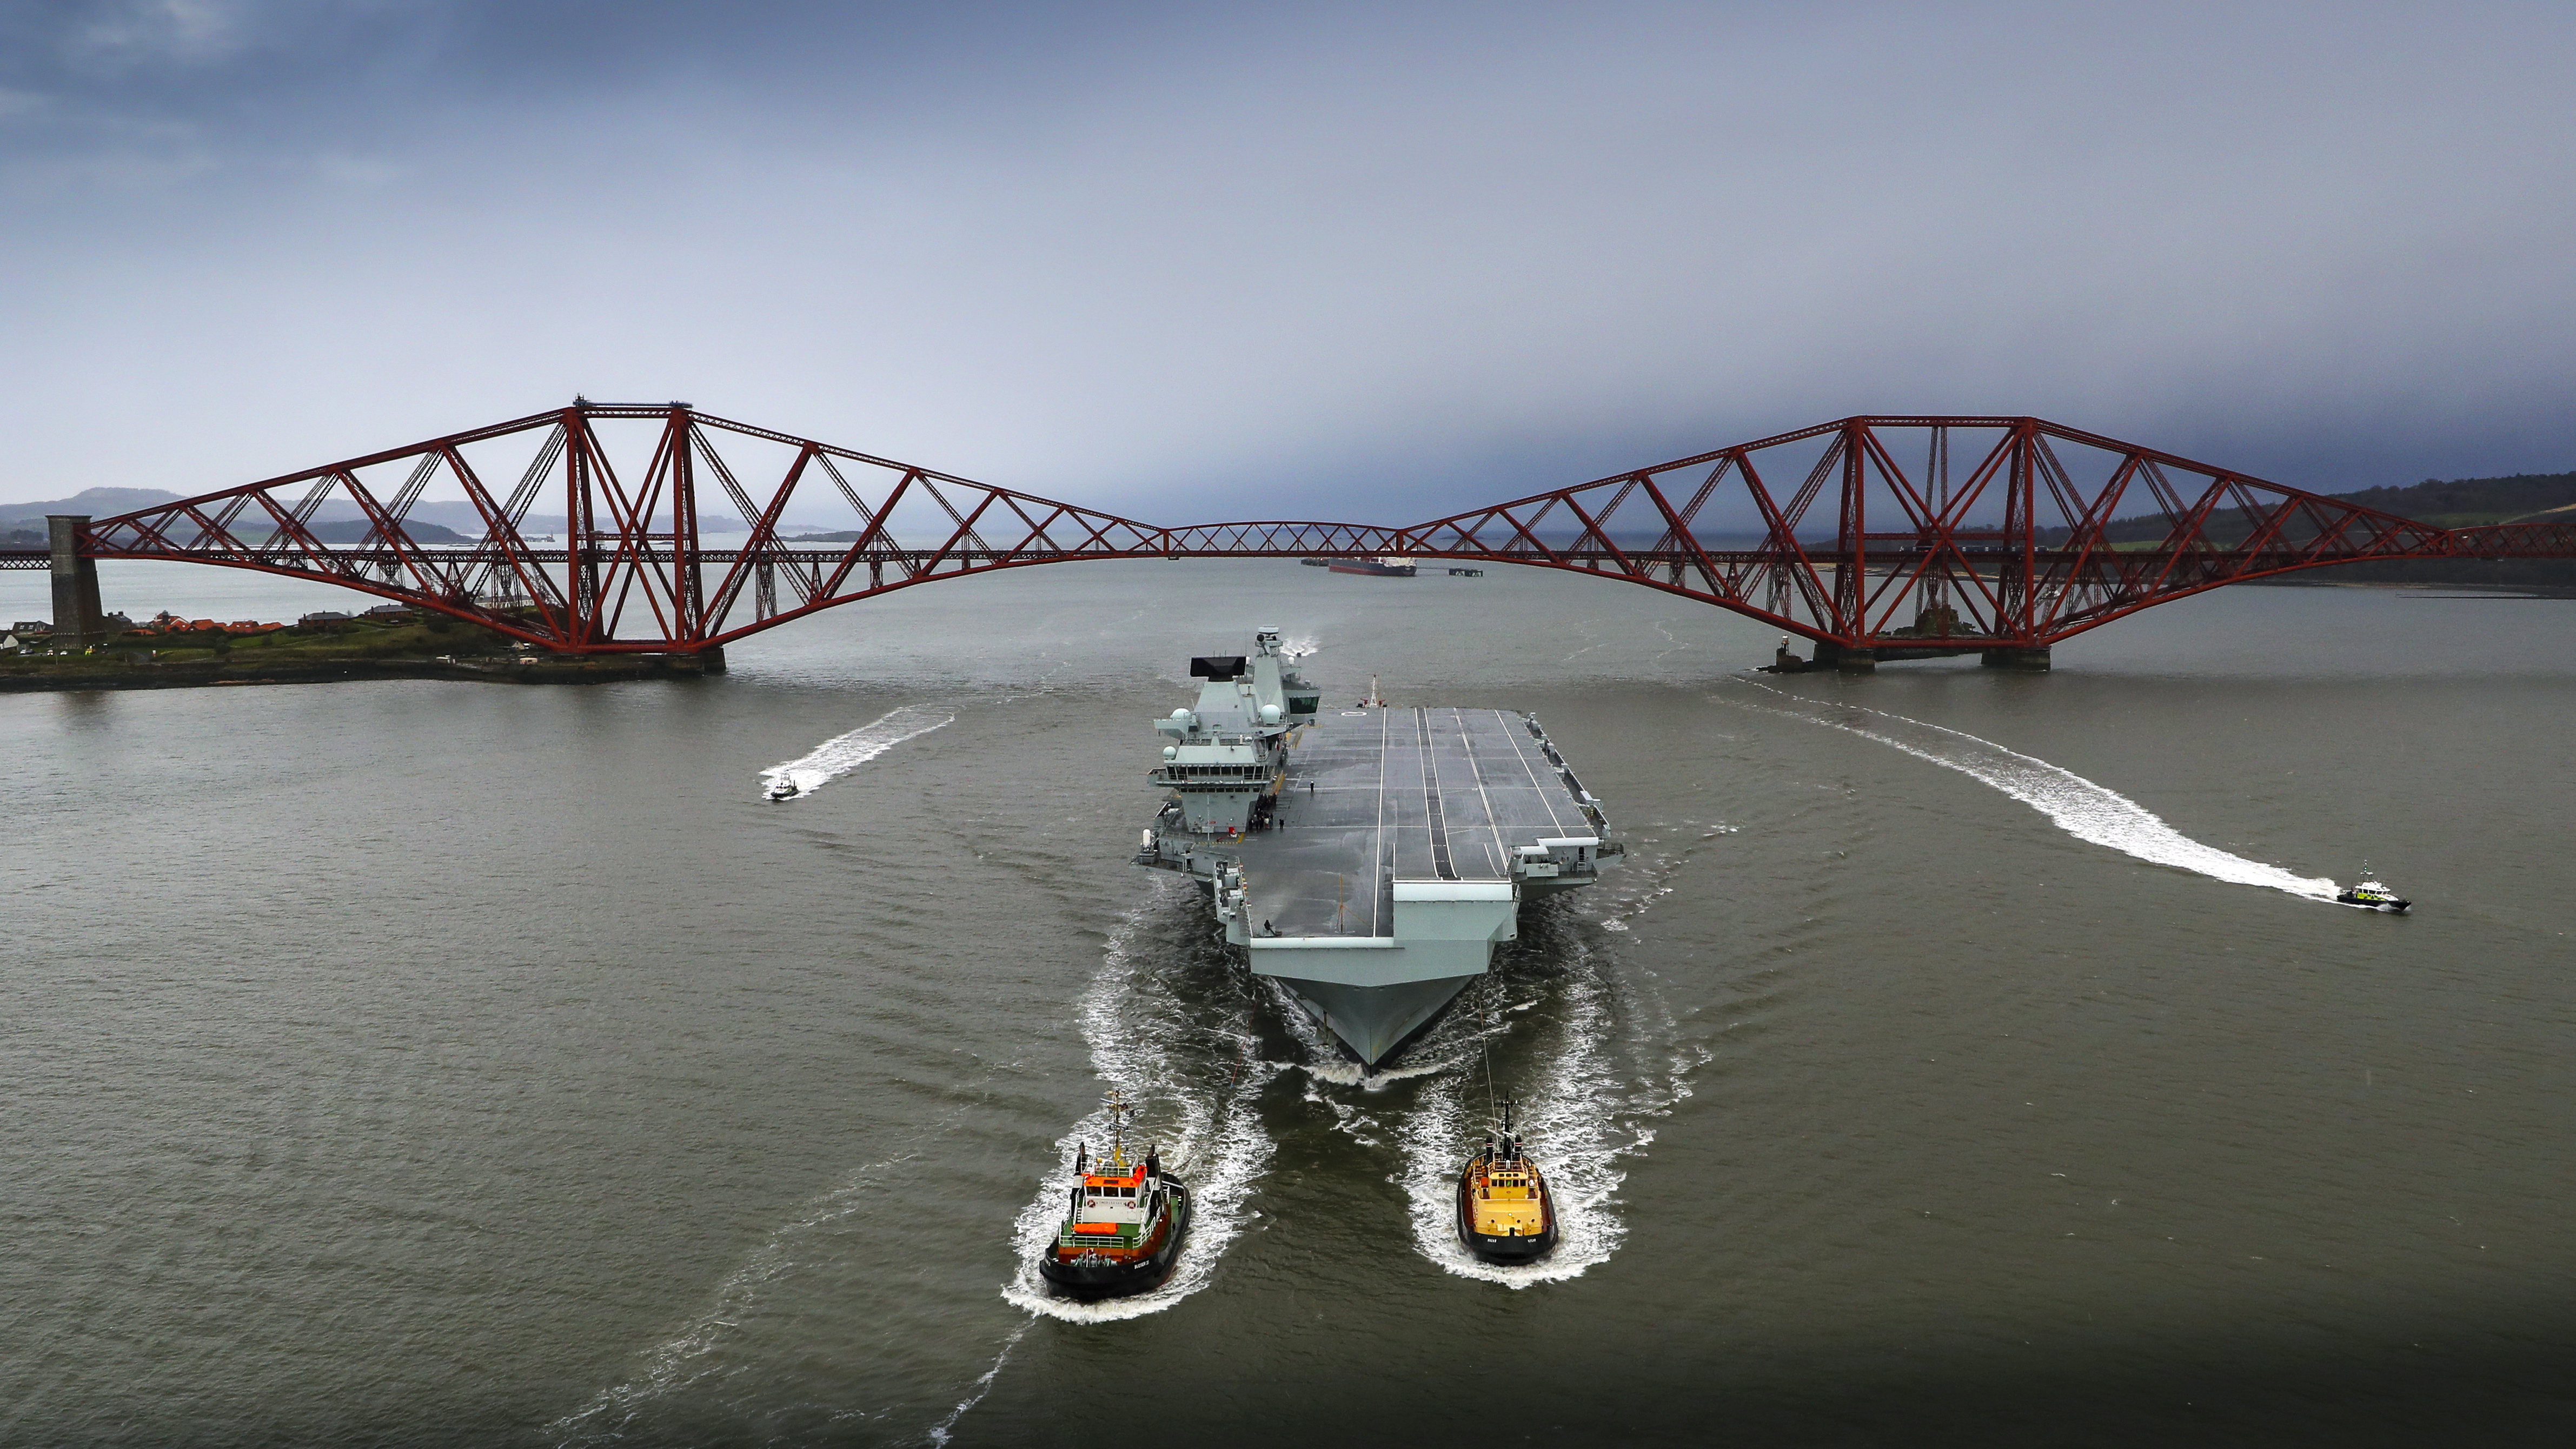 HMS Queen Elizabeth on the Forth